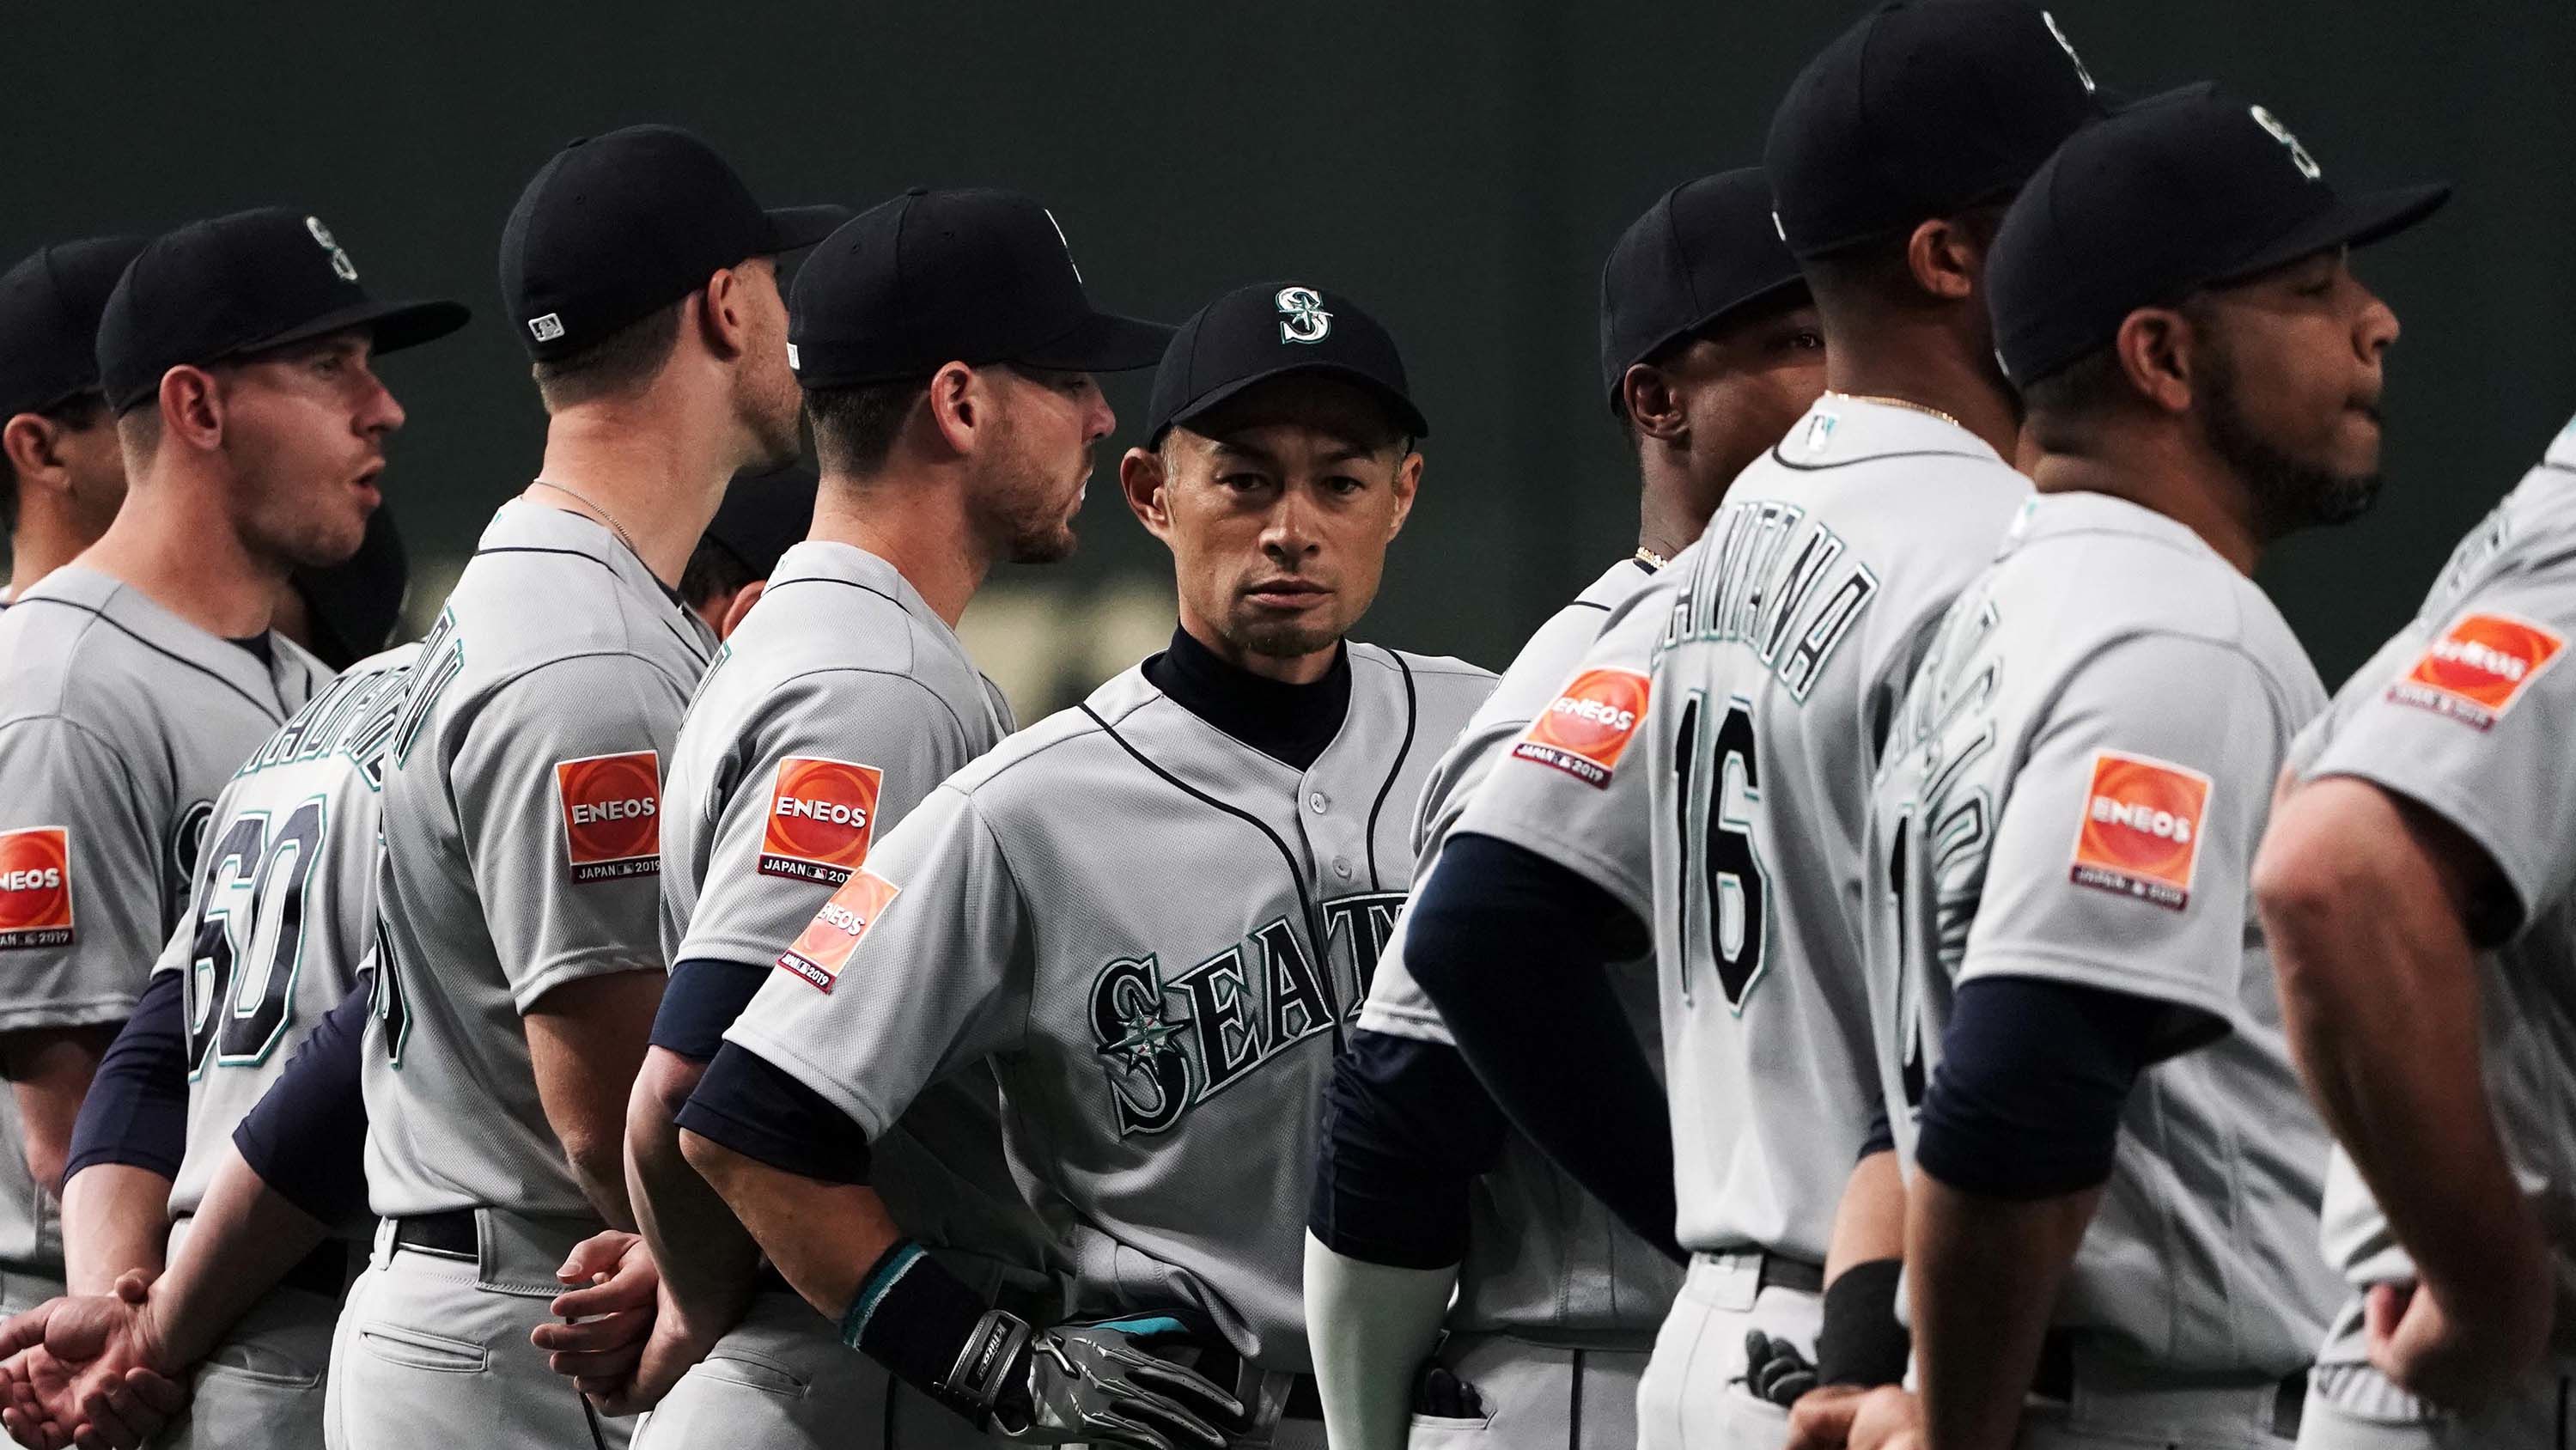 Ichiro lines up with his teammates for the national anthems prior to Wednesday's game.